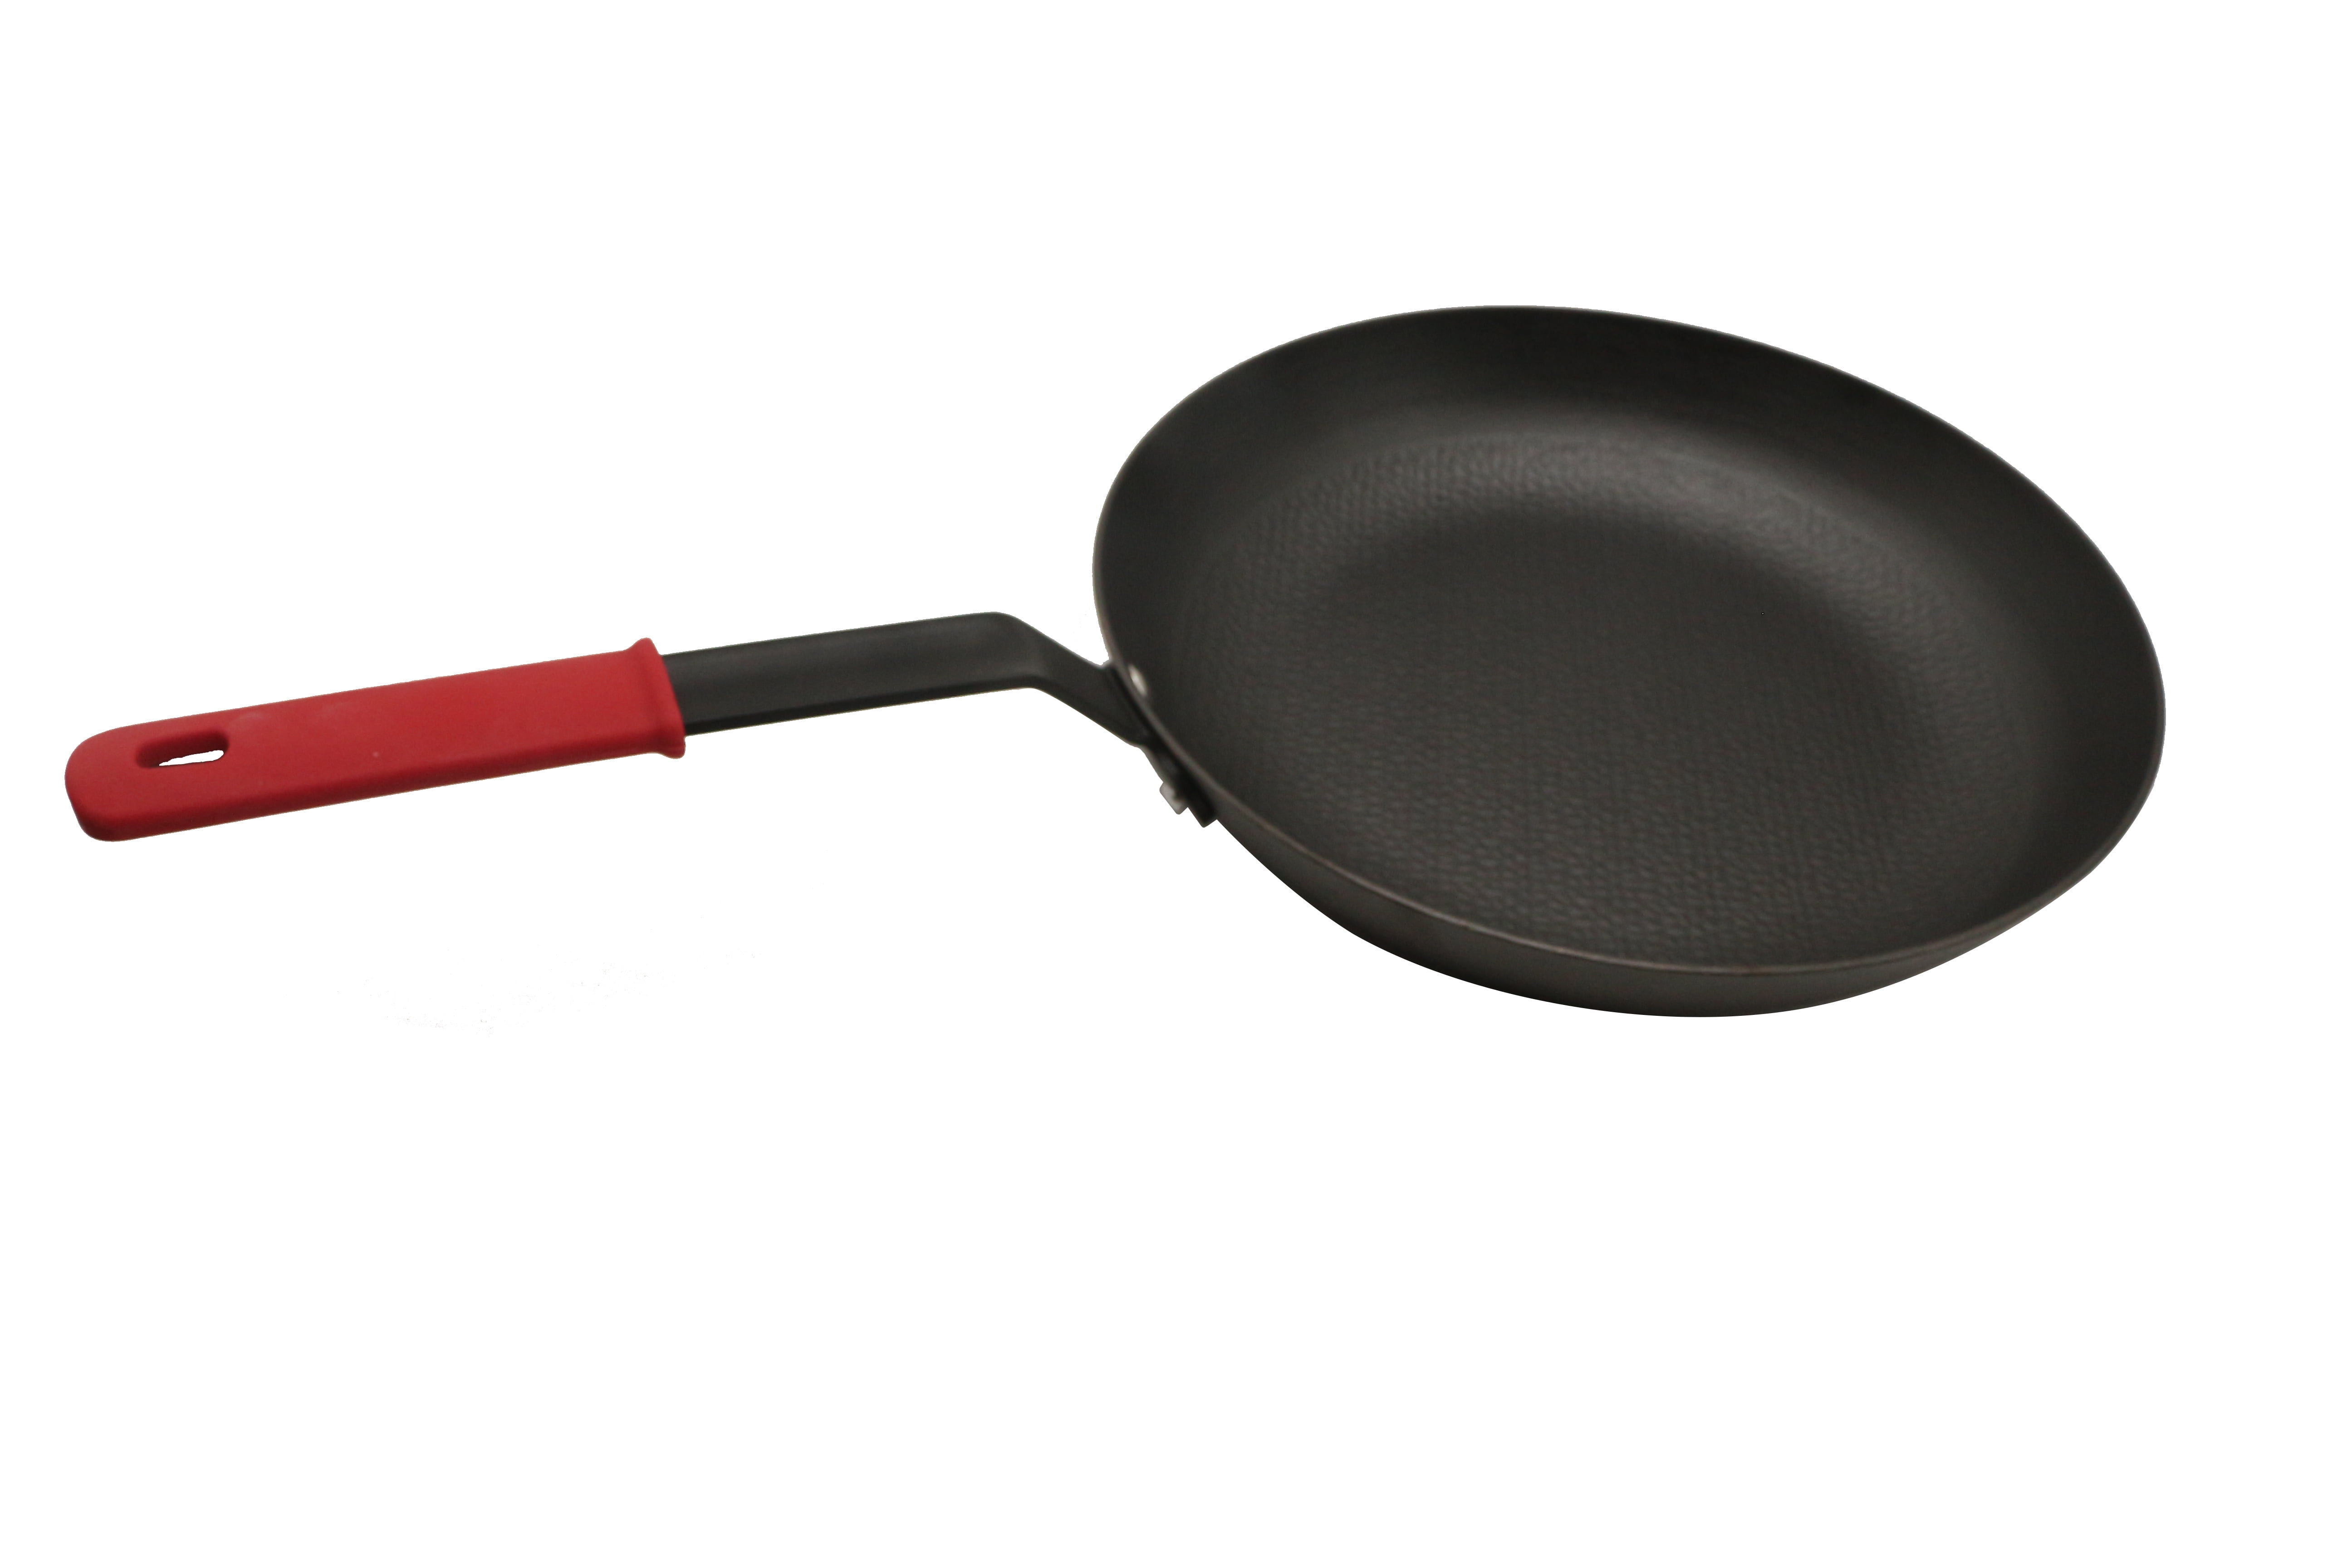 Stove & Dove Cast Iron Skillet with Silicone Handle 12.5 Inch